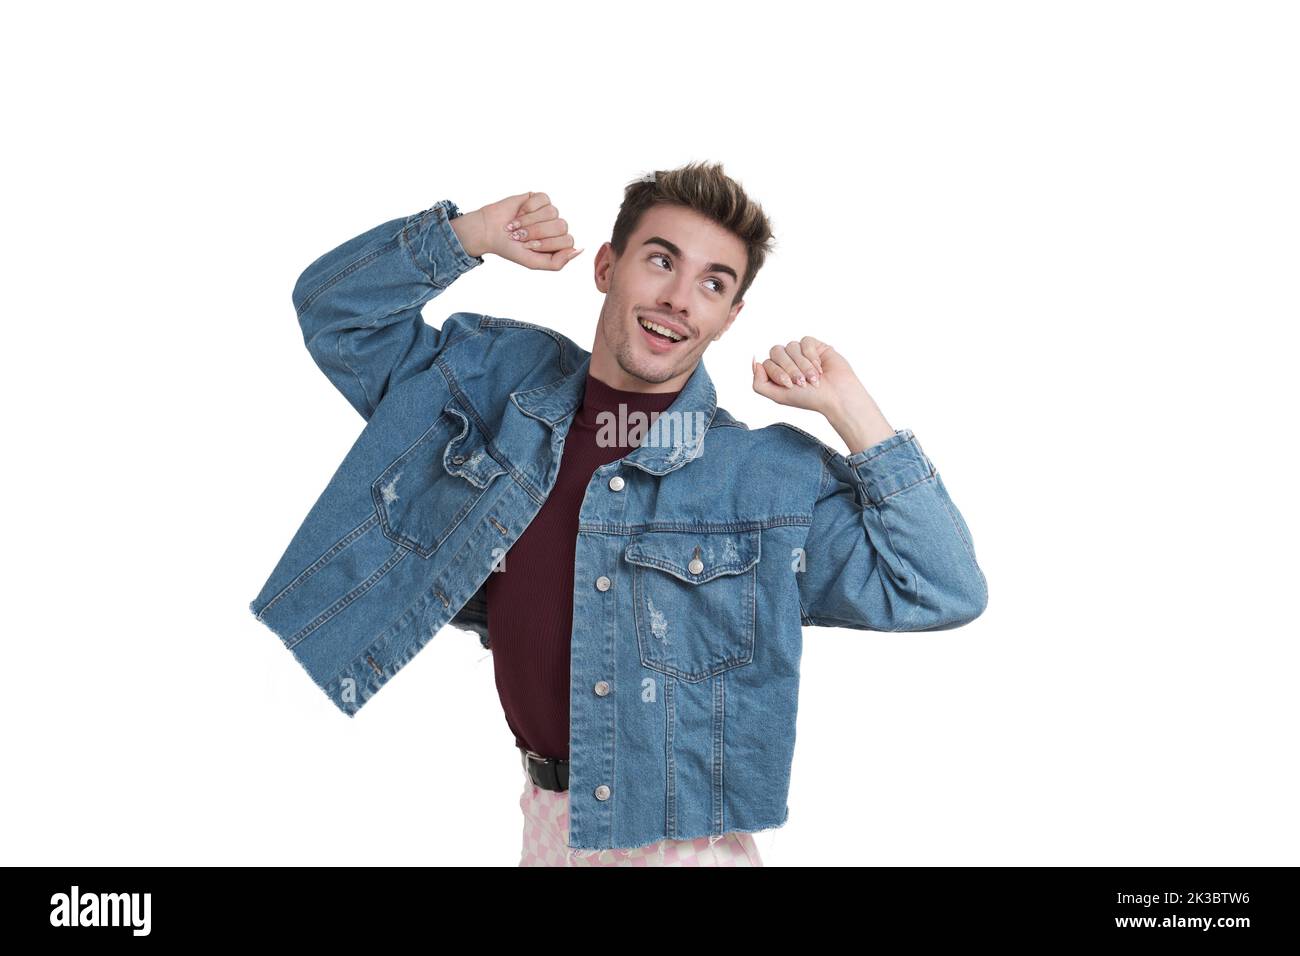 Young caucasian man dancing, isolated. Stock Photo